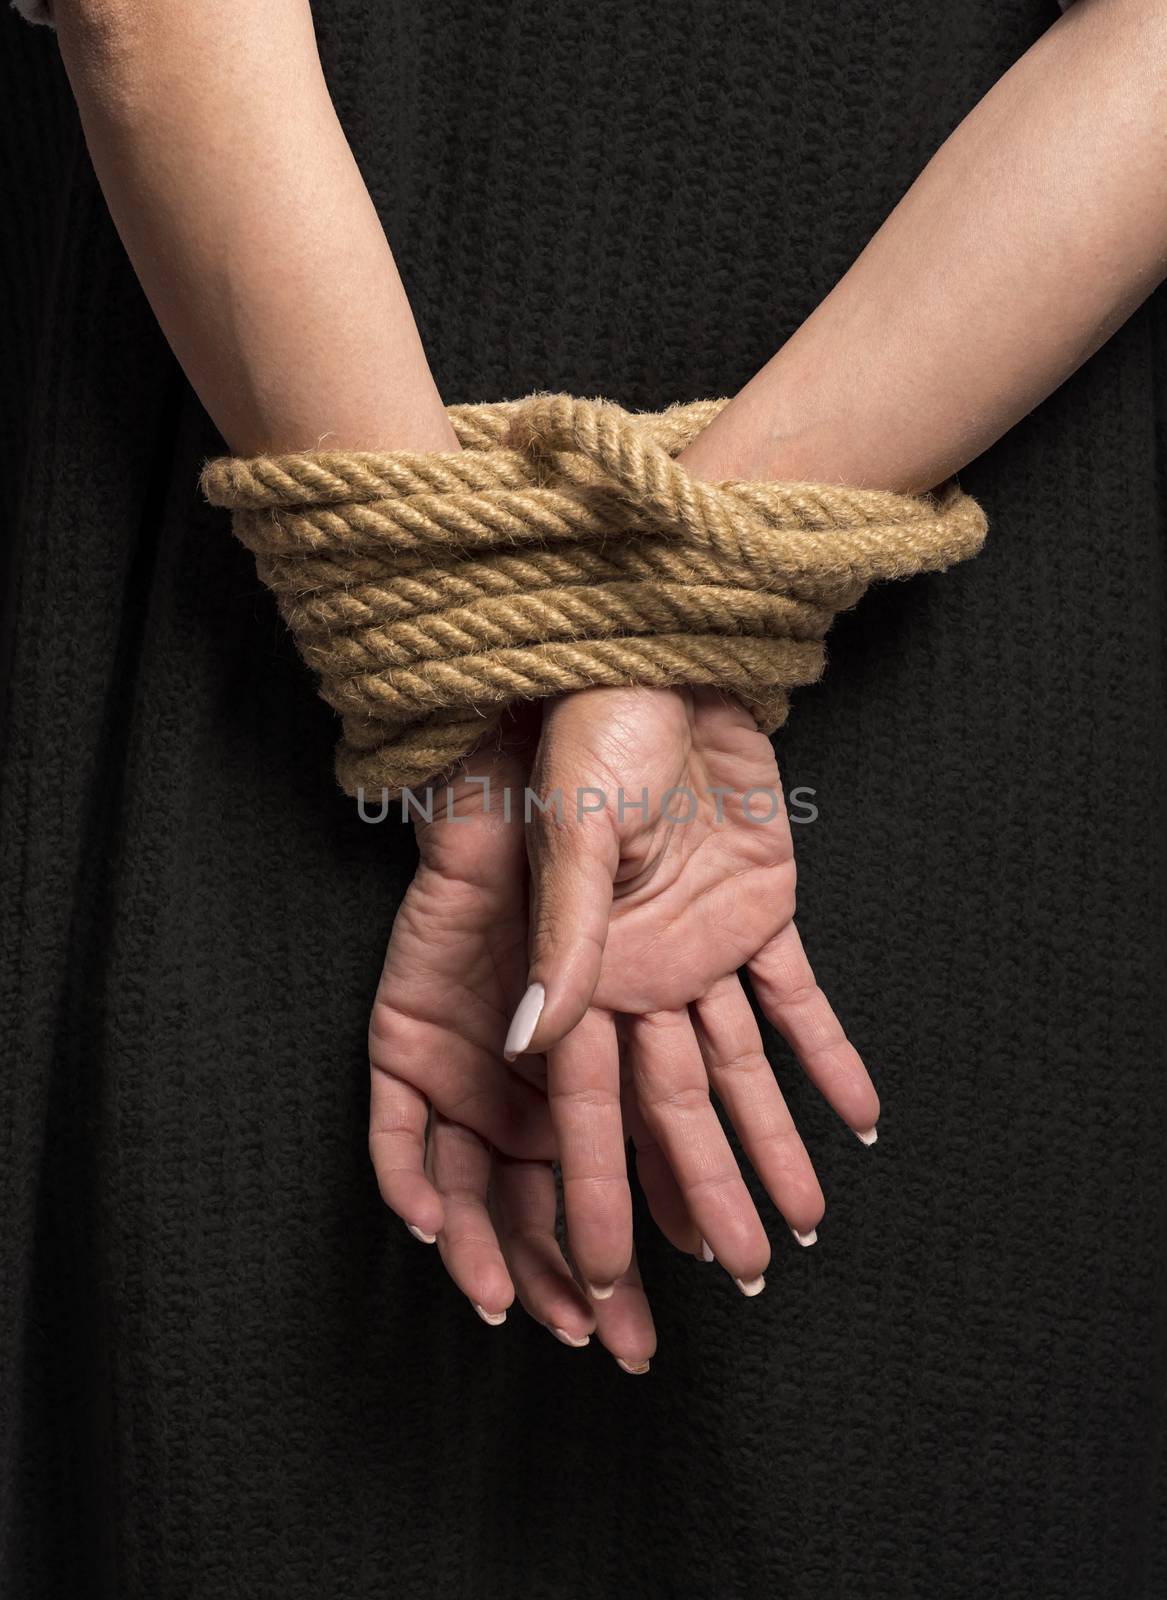 Womans hands on back tied with a rope, long nails